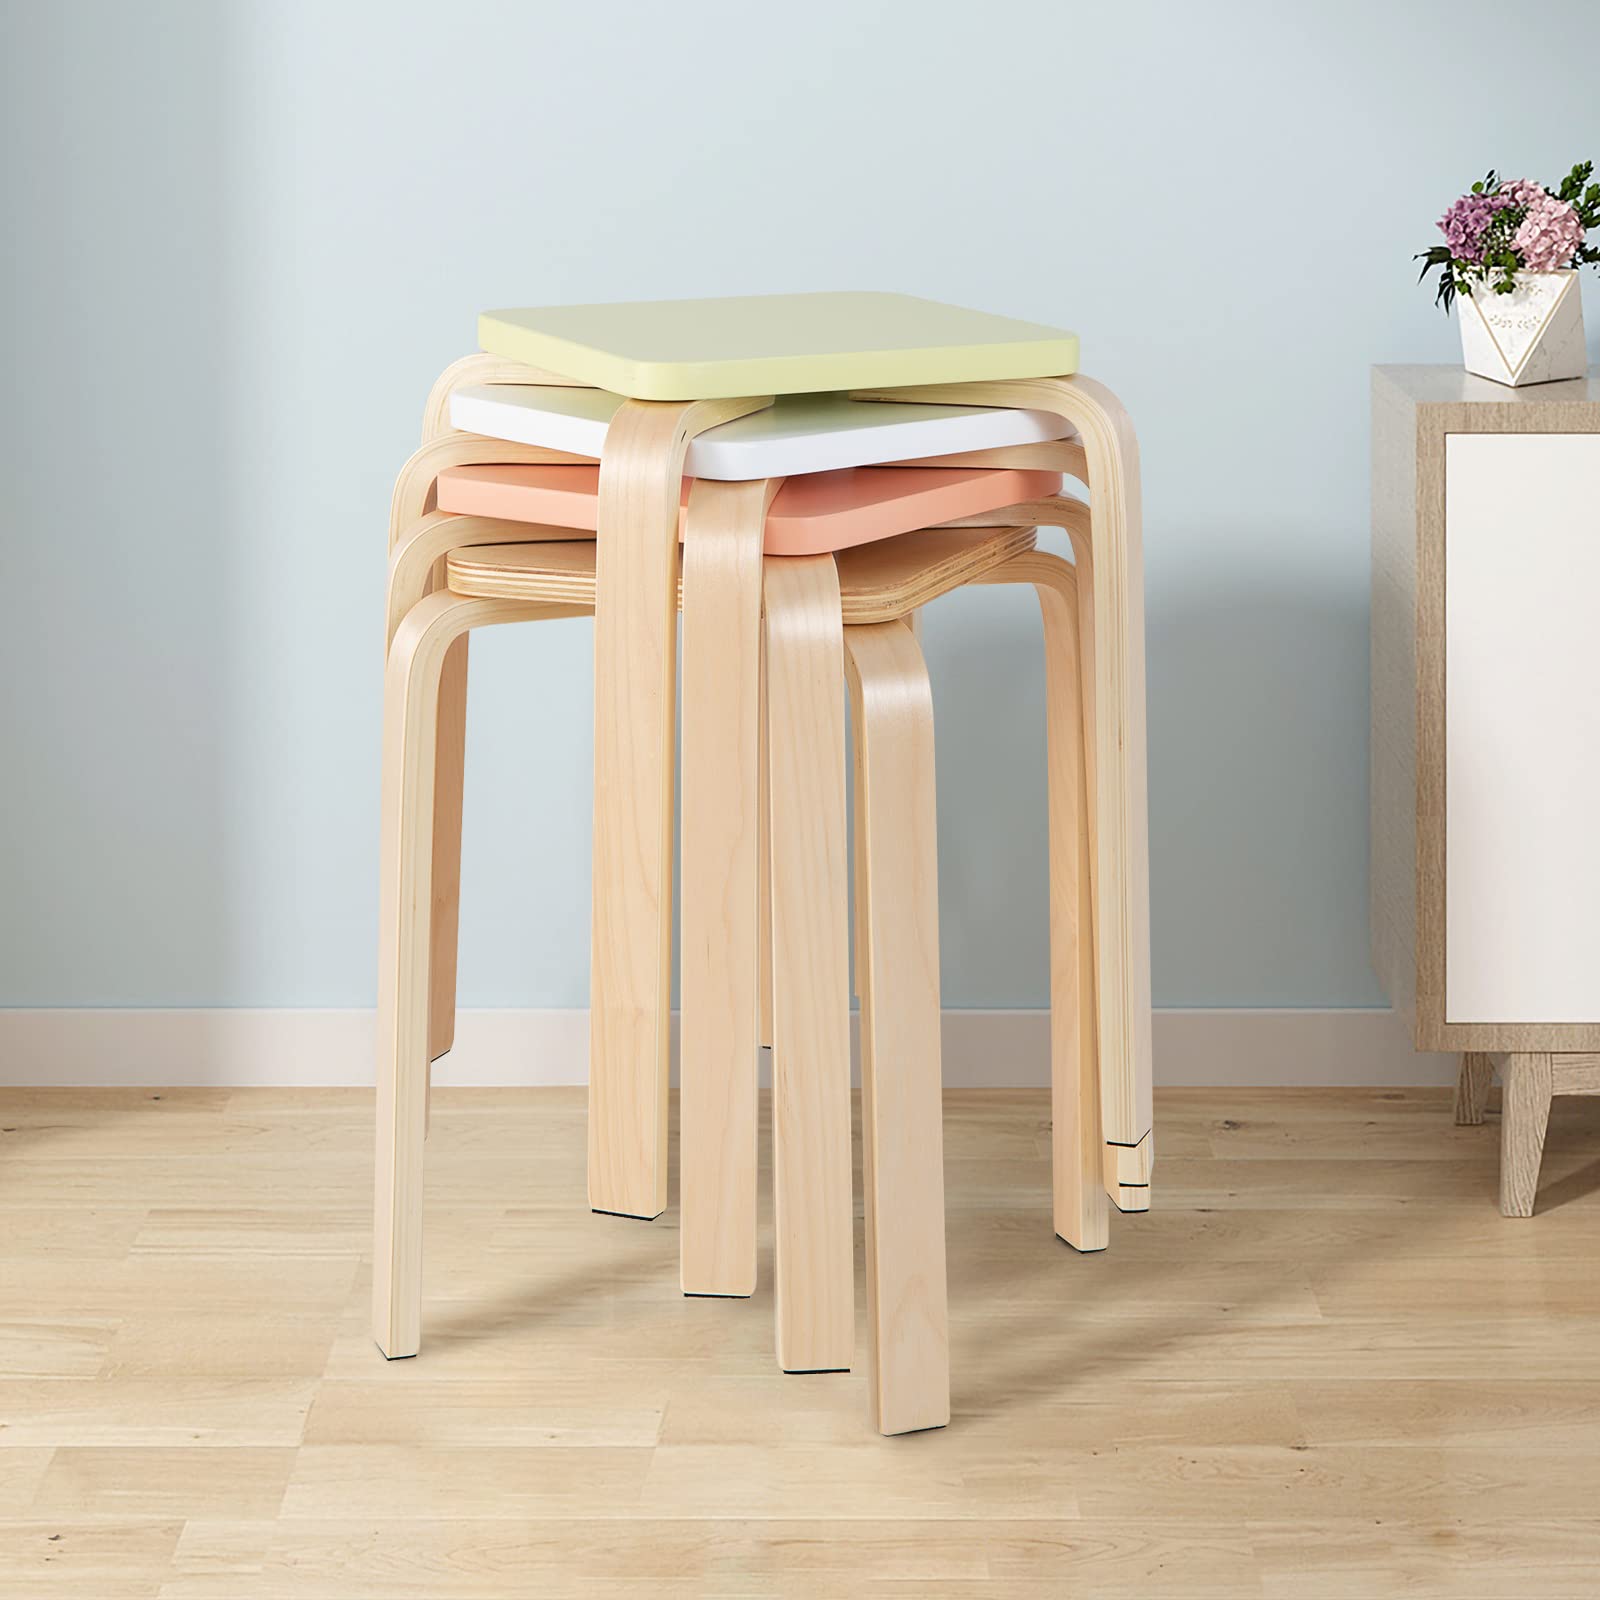 Stackable Wooden Stools Set of 4, Portable 18-Inch Height Backless School Stools